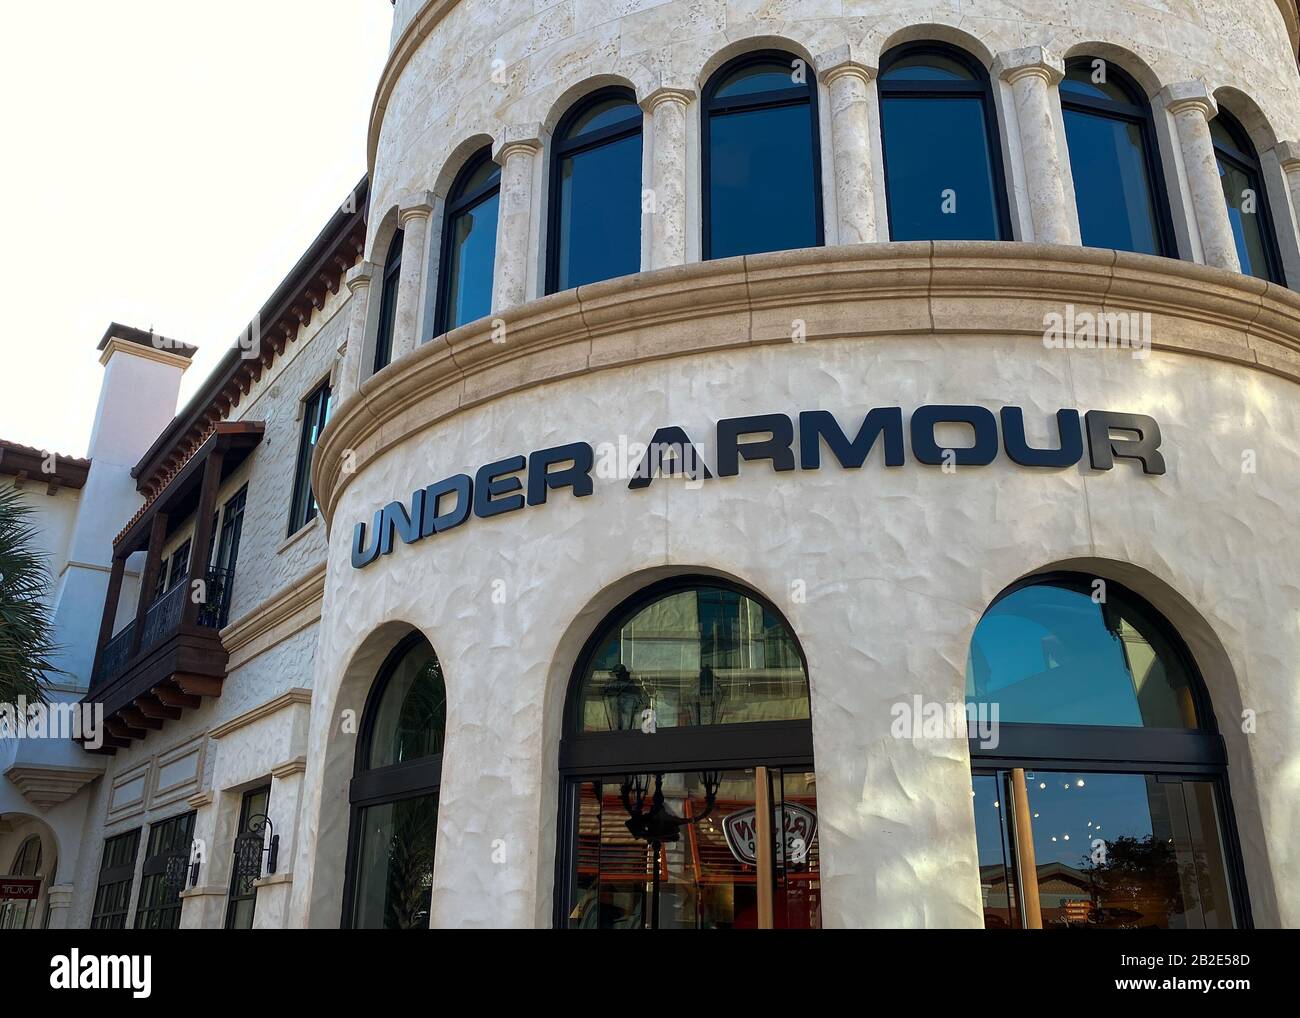 Orlando,FL/USA-2/13/20: An Under Armour clothing store at an indoor mall. Under Inc. is an American that manufactures footwear, Stock Photo - Alamy